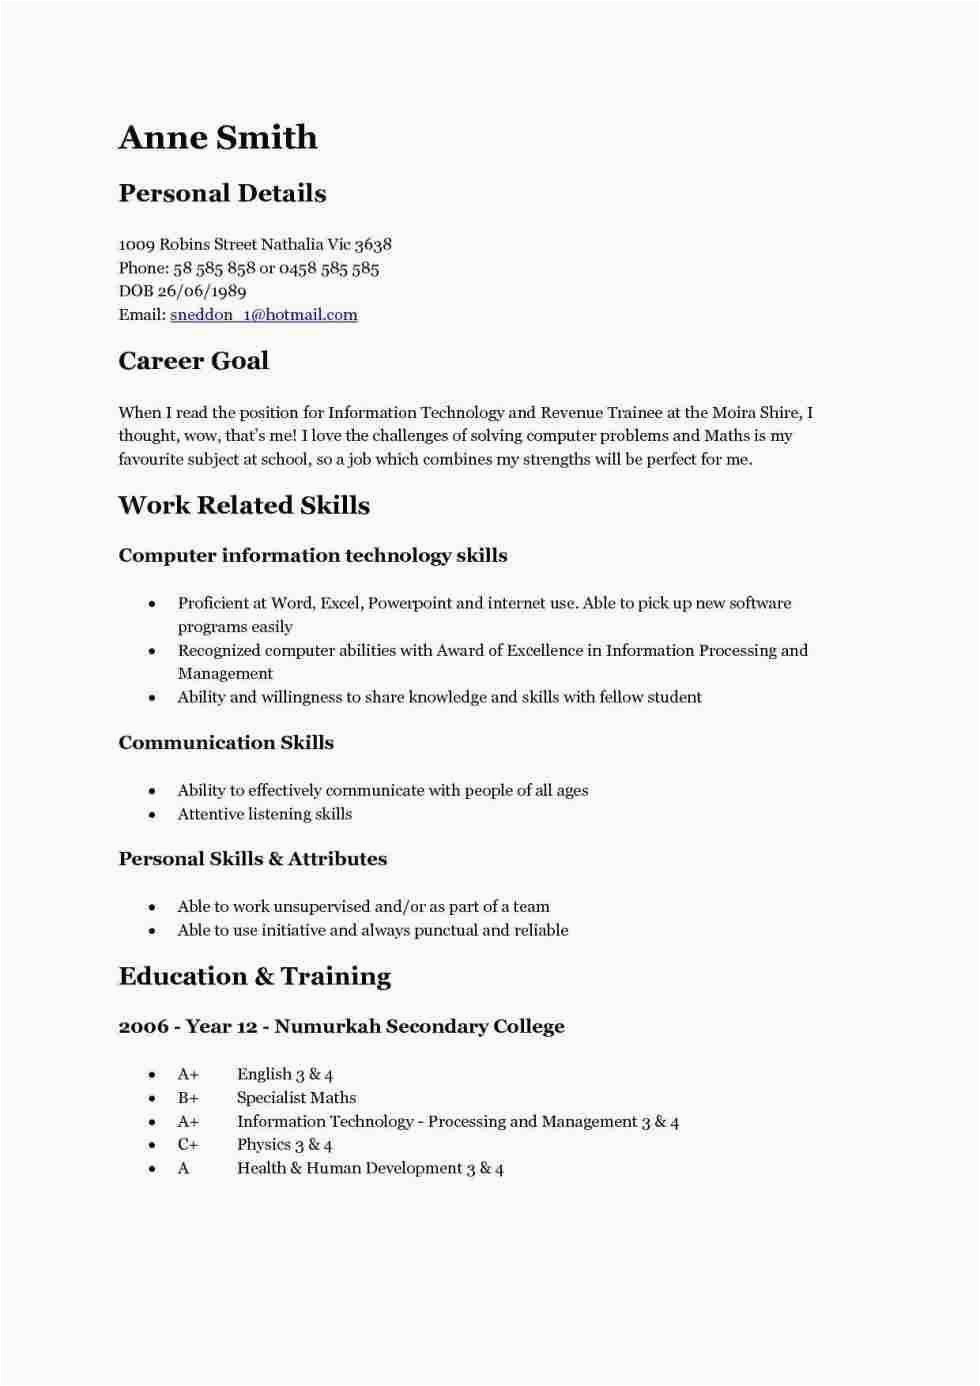 Resume for 15 Year Old First Job Template Pin On Resume Templates